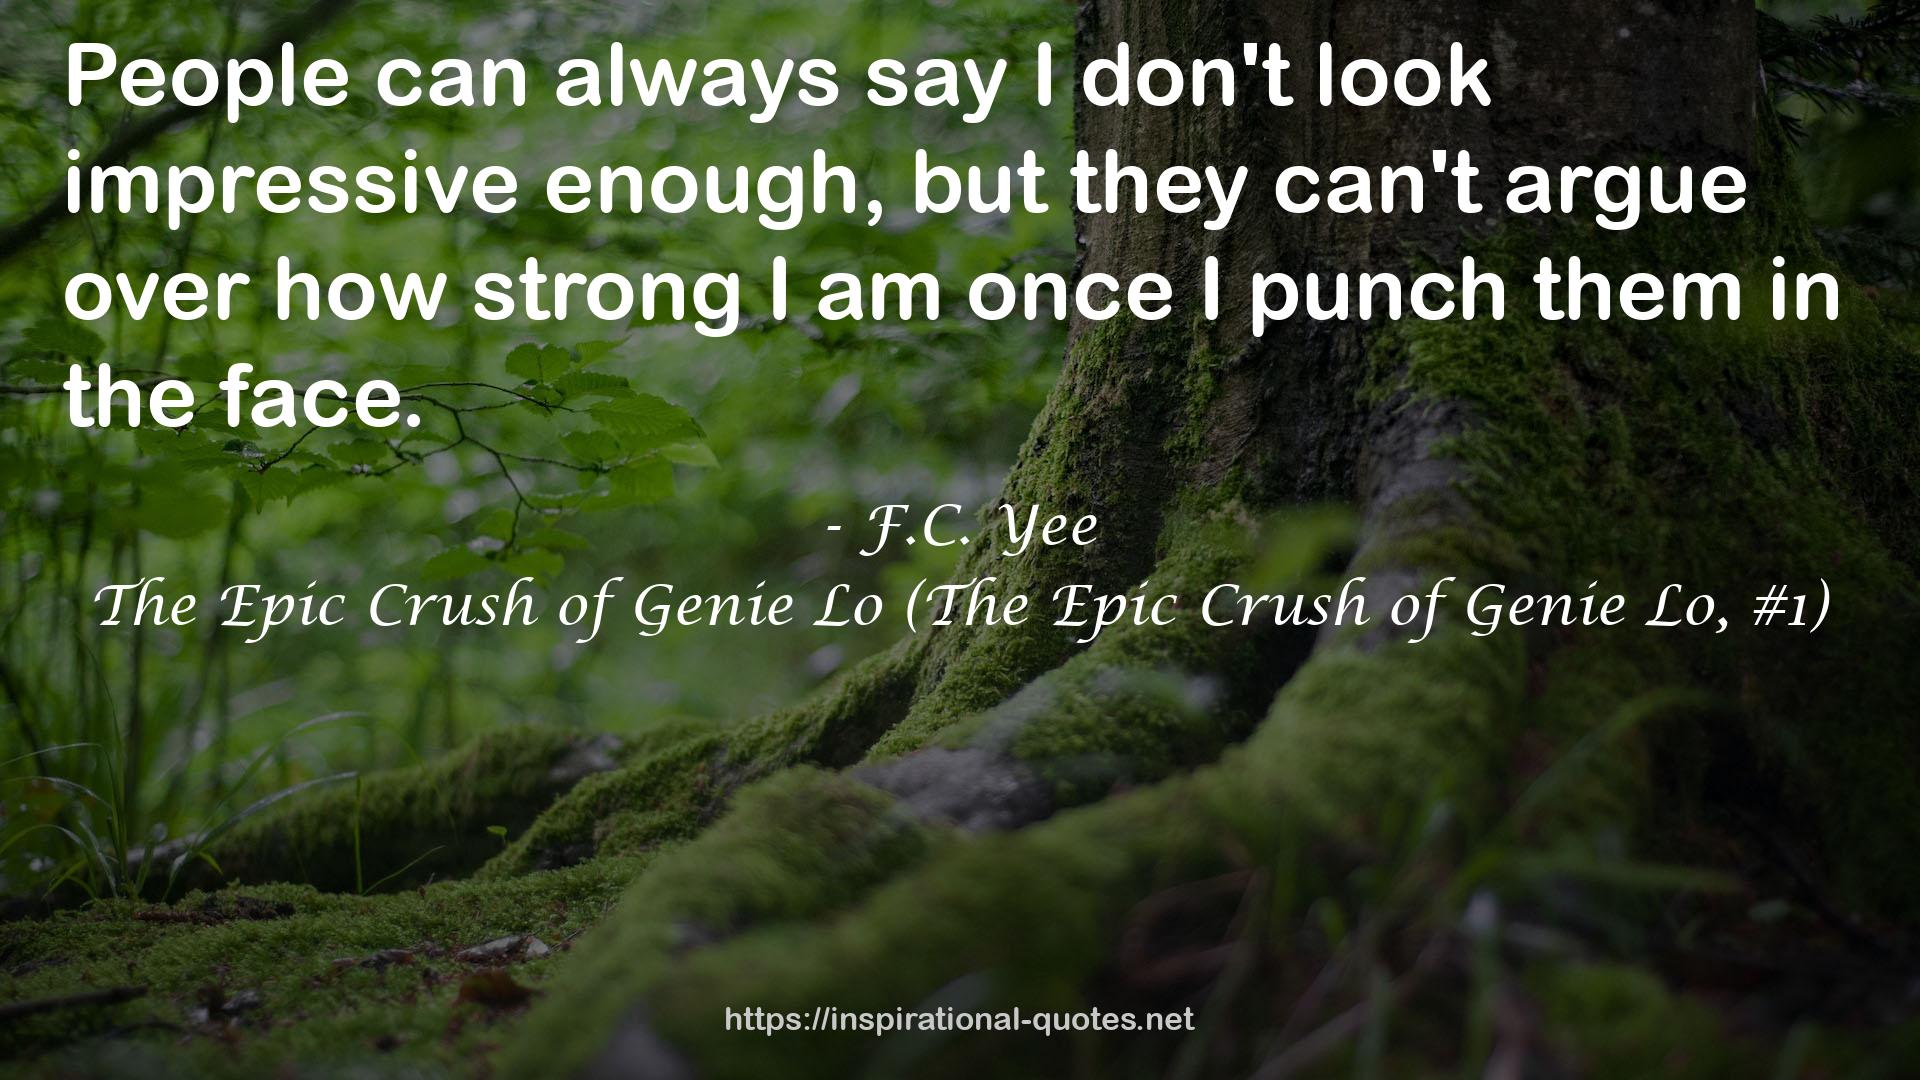 The Epic Crush of Genie Lo (The Epic Crush of Genie Lo, #1) QUOTES